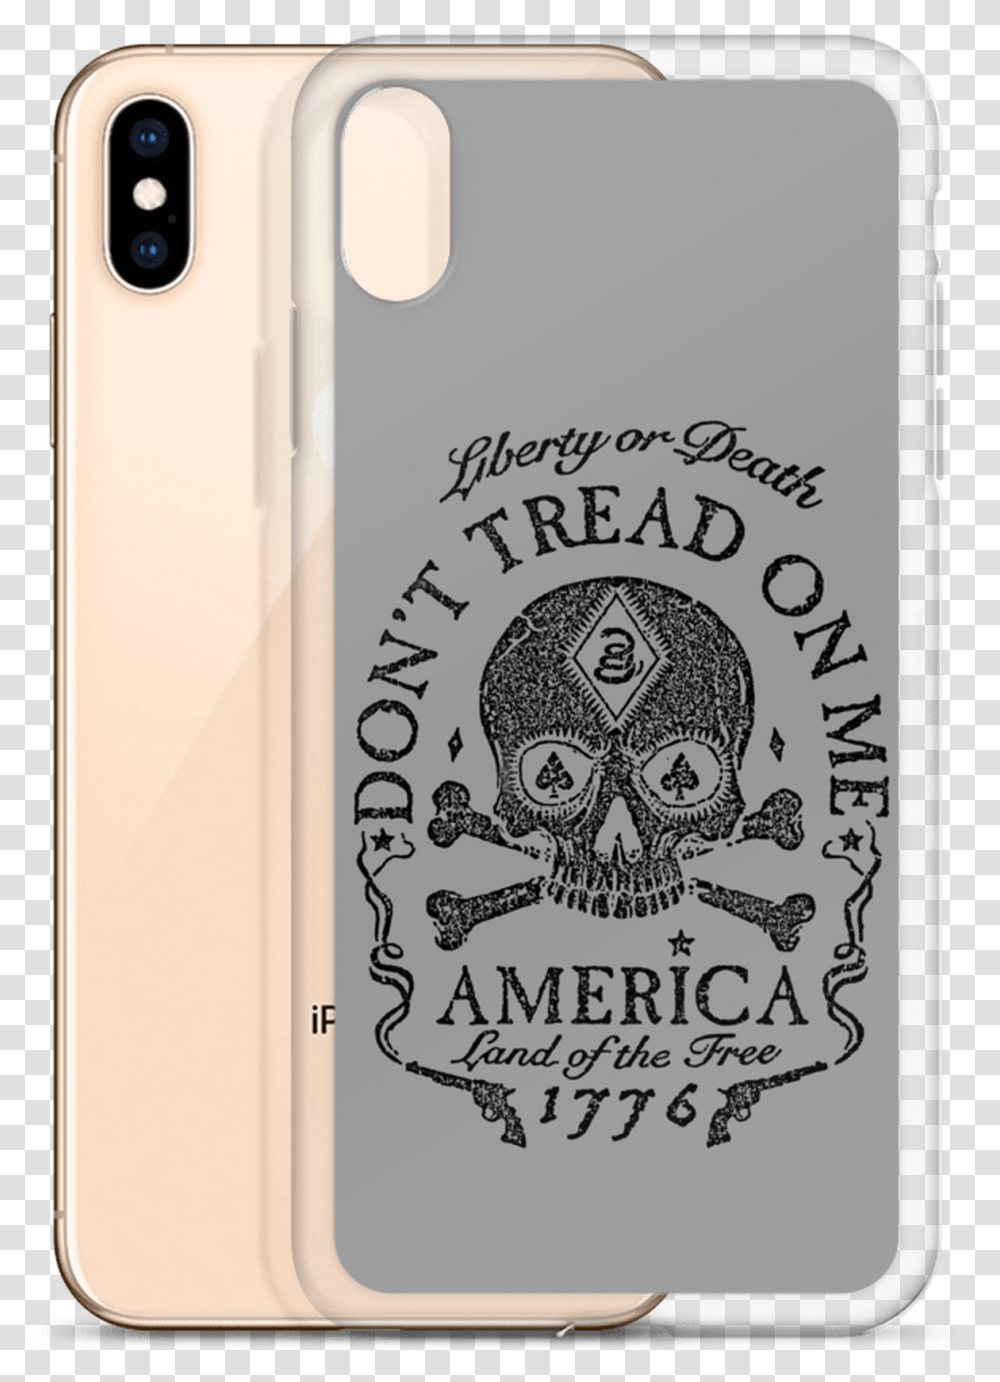 Liberty Or Death Iphone Case Iphone, Mobile Phone, Electronics, Cell Phone Transparent Png